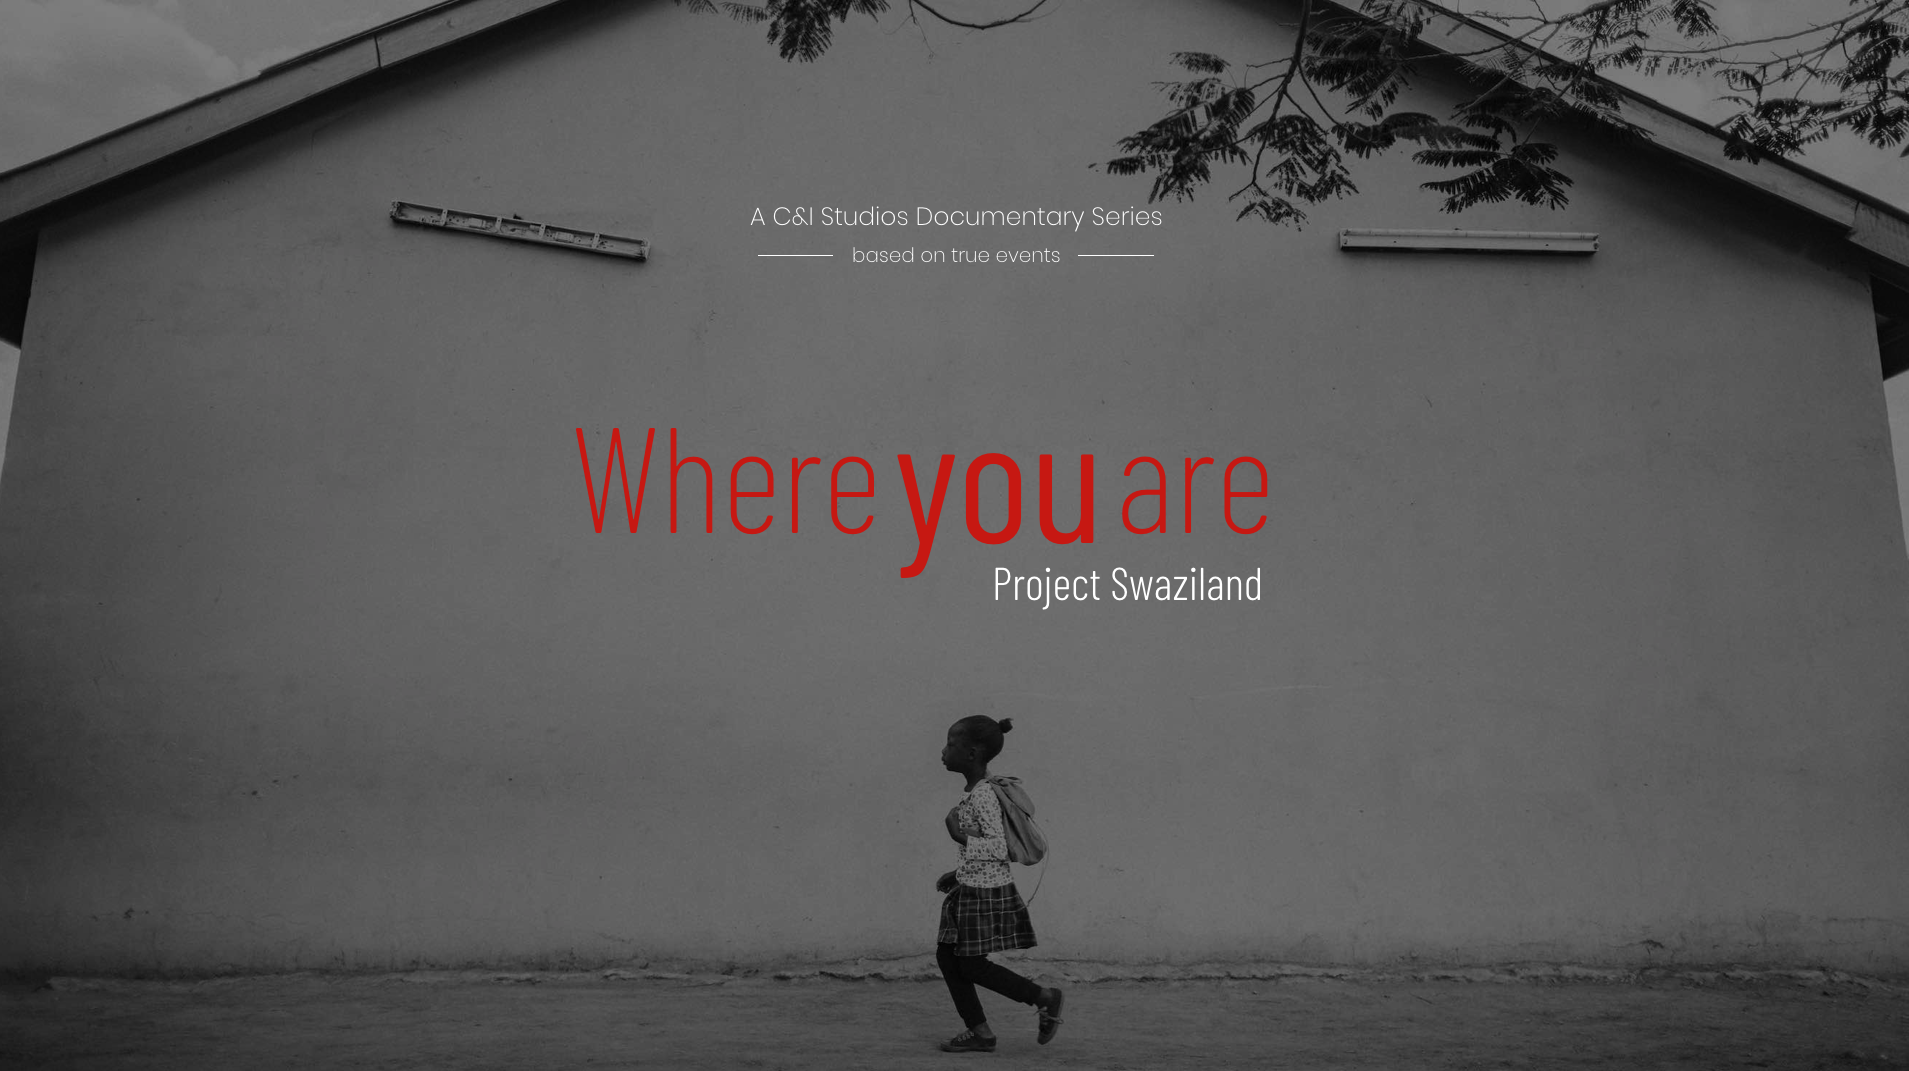 Where You Are Documentary Series Feature film mastering and delivery services by C&I studios Black and white side profile of girl walking past a building wearing a skirt and backpack